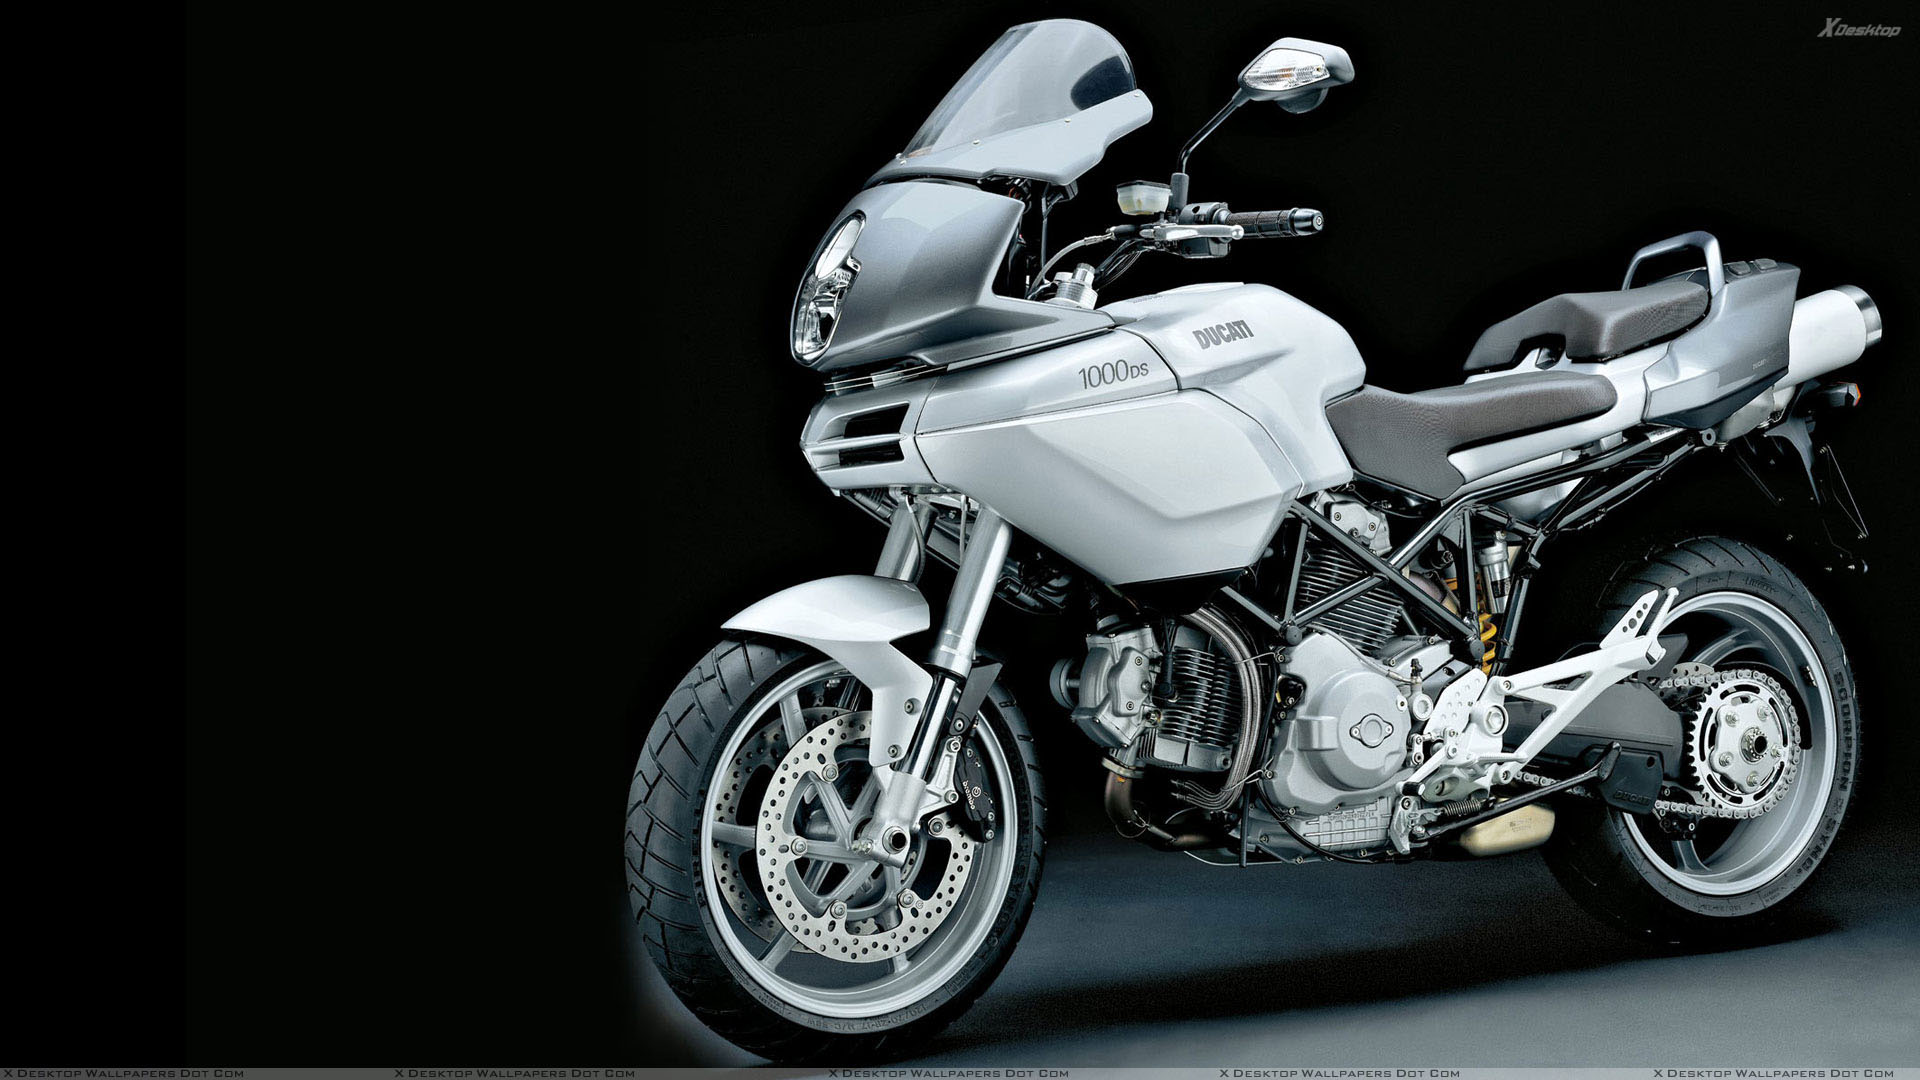 You Are Viewing Wallpaper - Ducati Multistrada 1000 Ds 2003 , HD Wallpaper & Backgrounds